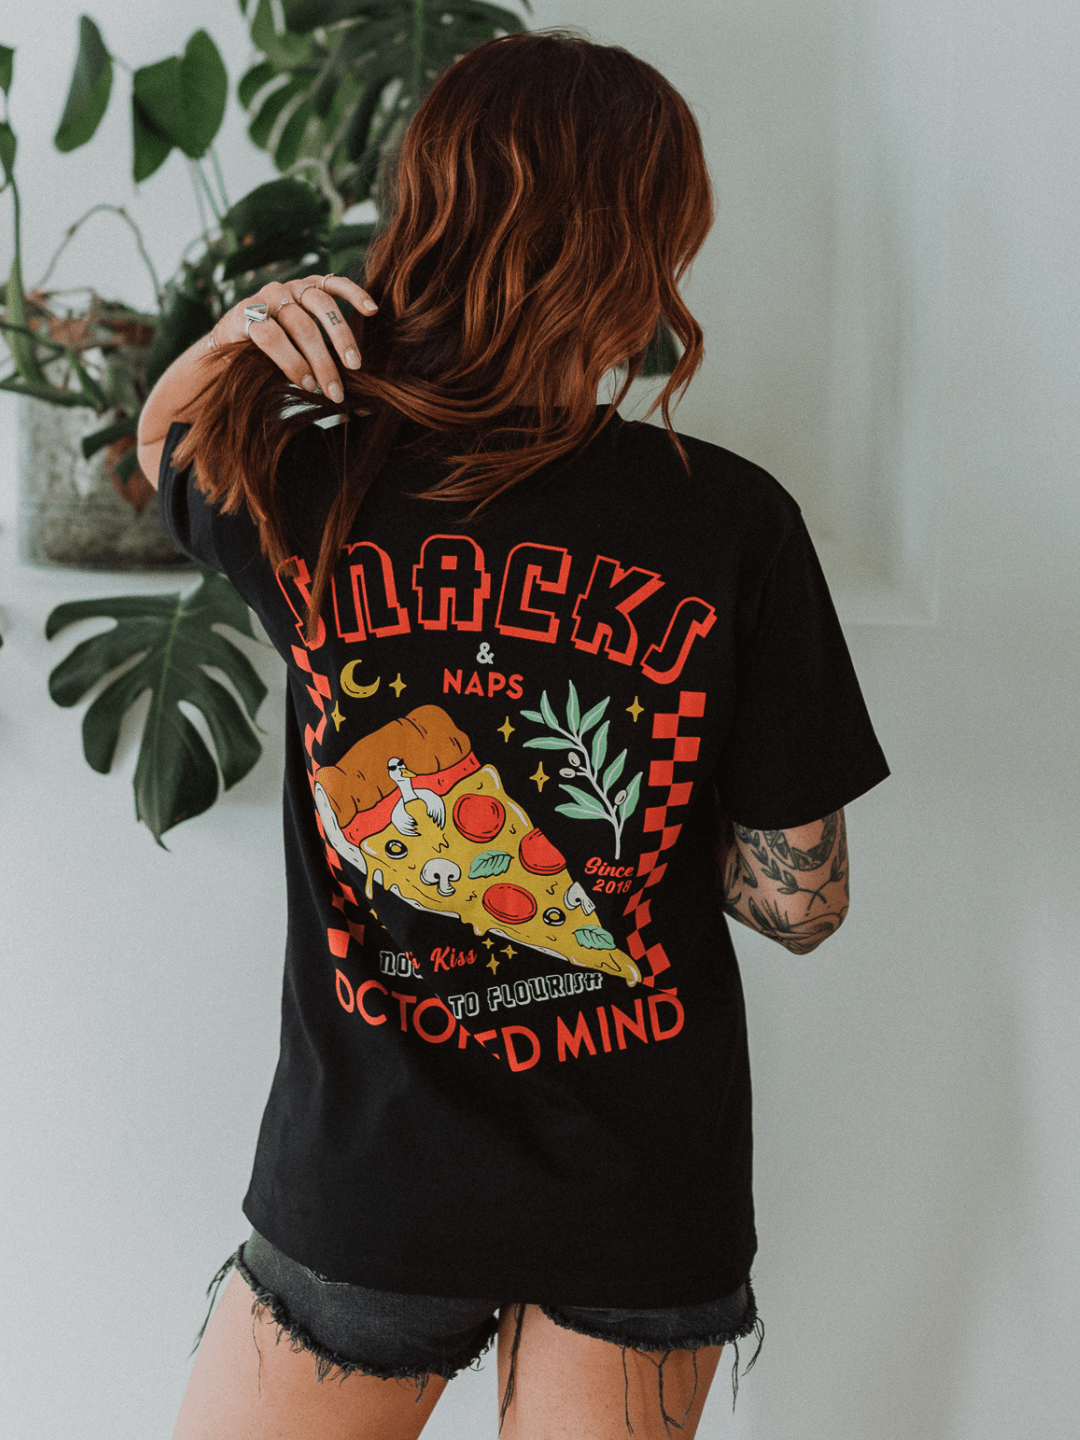 Snacks and Naps T-Shirt | Octopied Mind